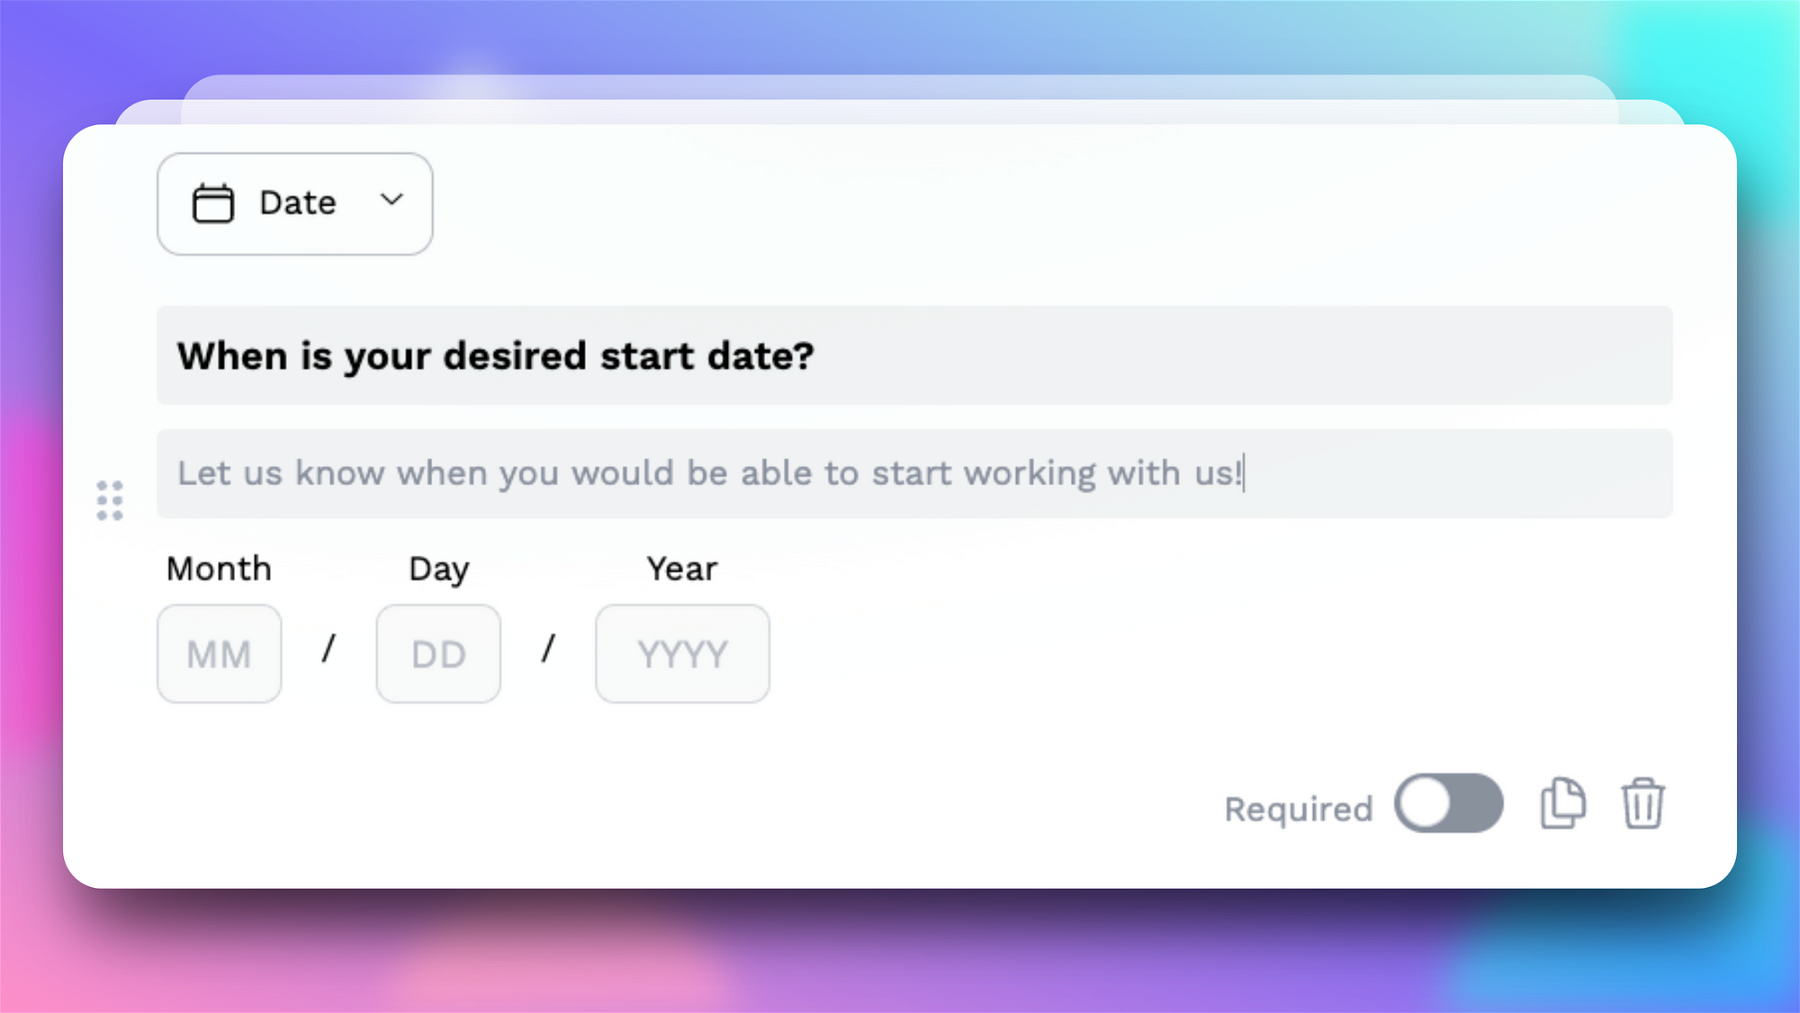 Example of a Date question on a form: “When is your desired start date?”